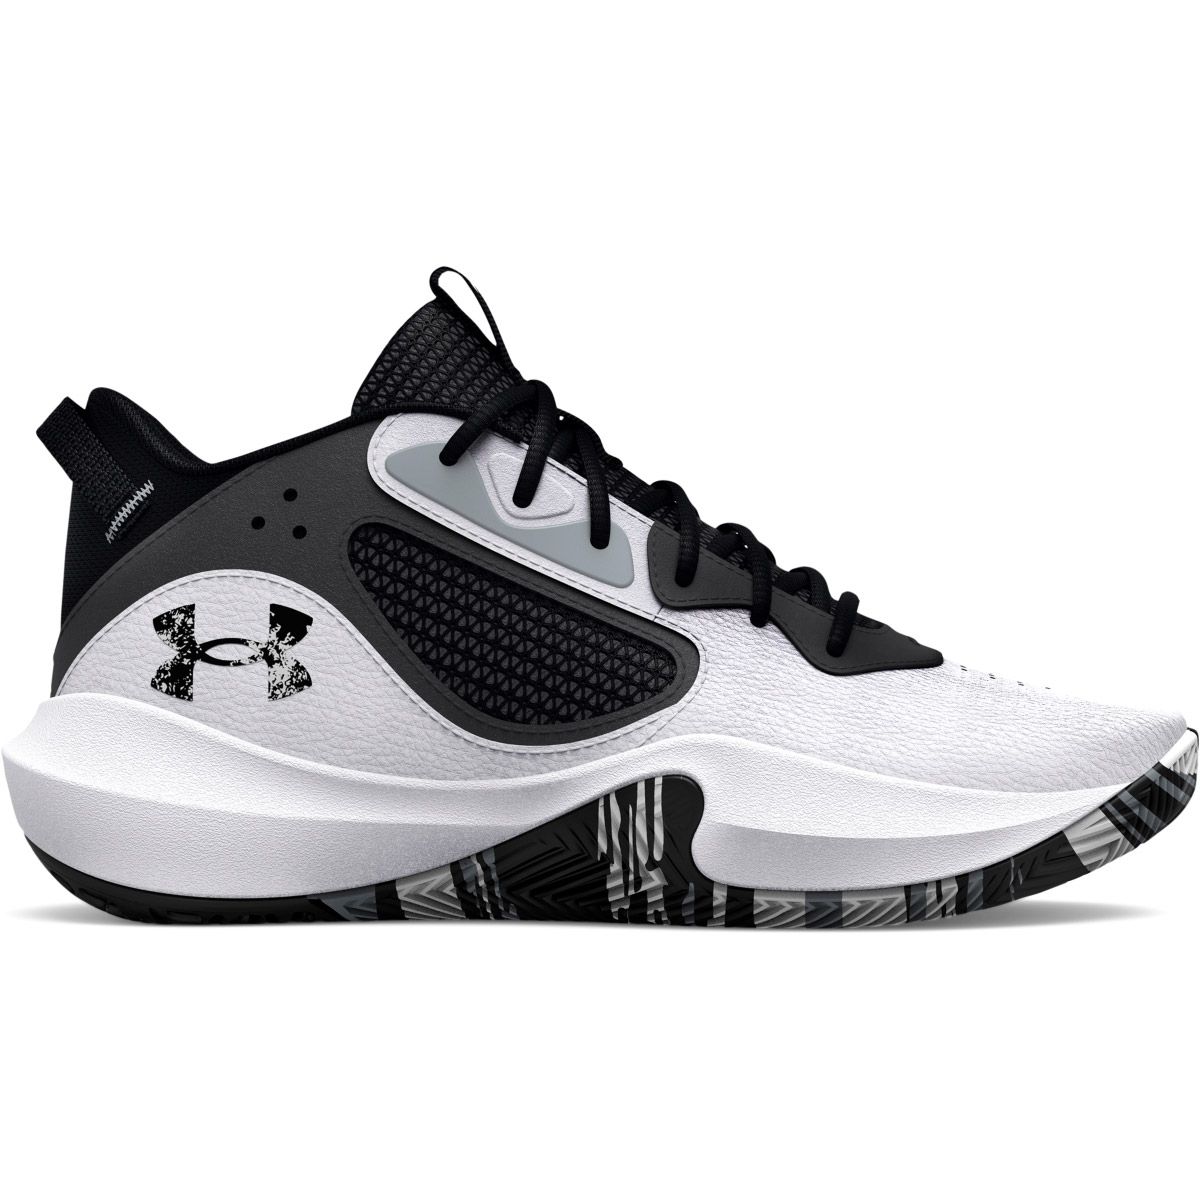 Under Armour Lockdown 6 Junior Basketball Shoes (GS) 3025617